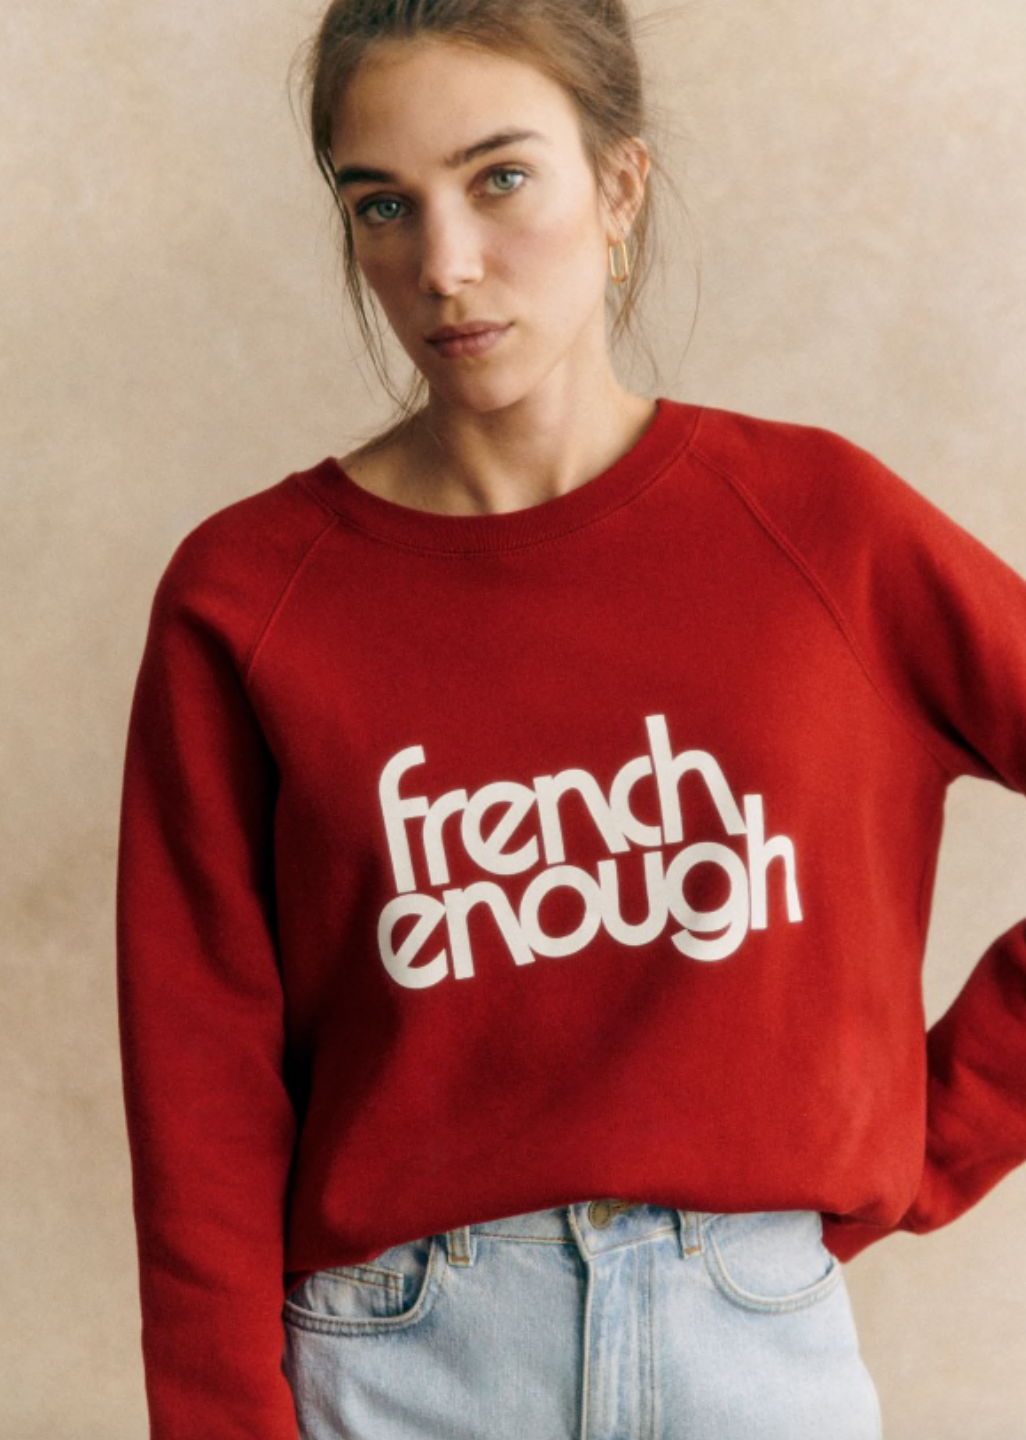 Stay comfy and stylish with this long-sleeved organic cotton sweatshirt. Show off your love for French culture with the "French Enough" print on the front, while staying cozy with the round neckline. Good for you and the environment.